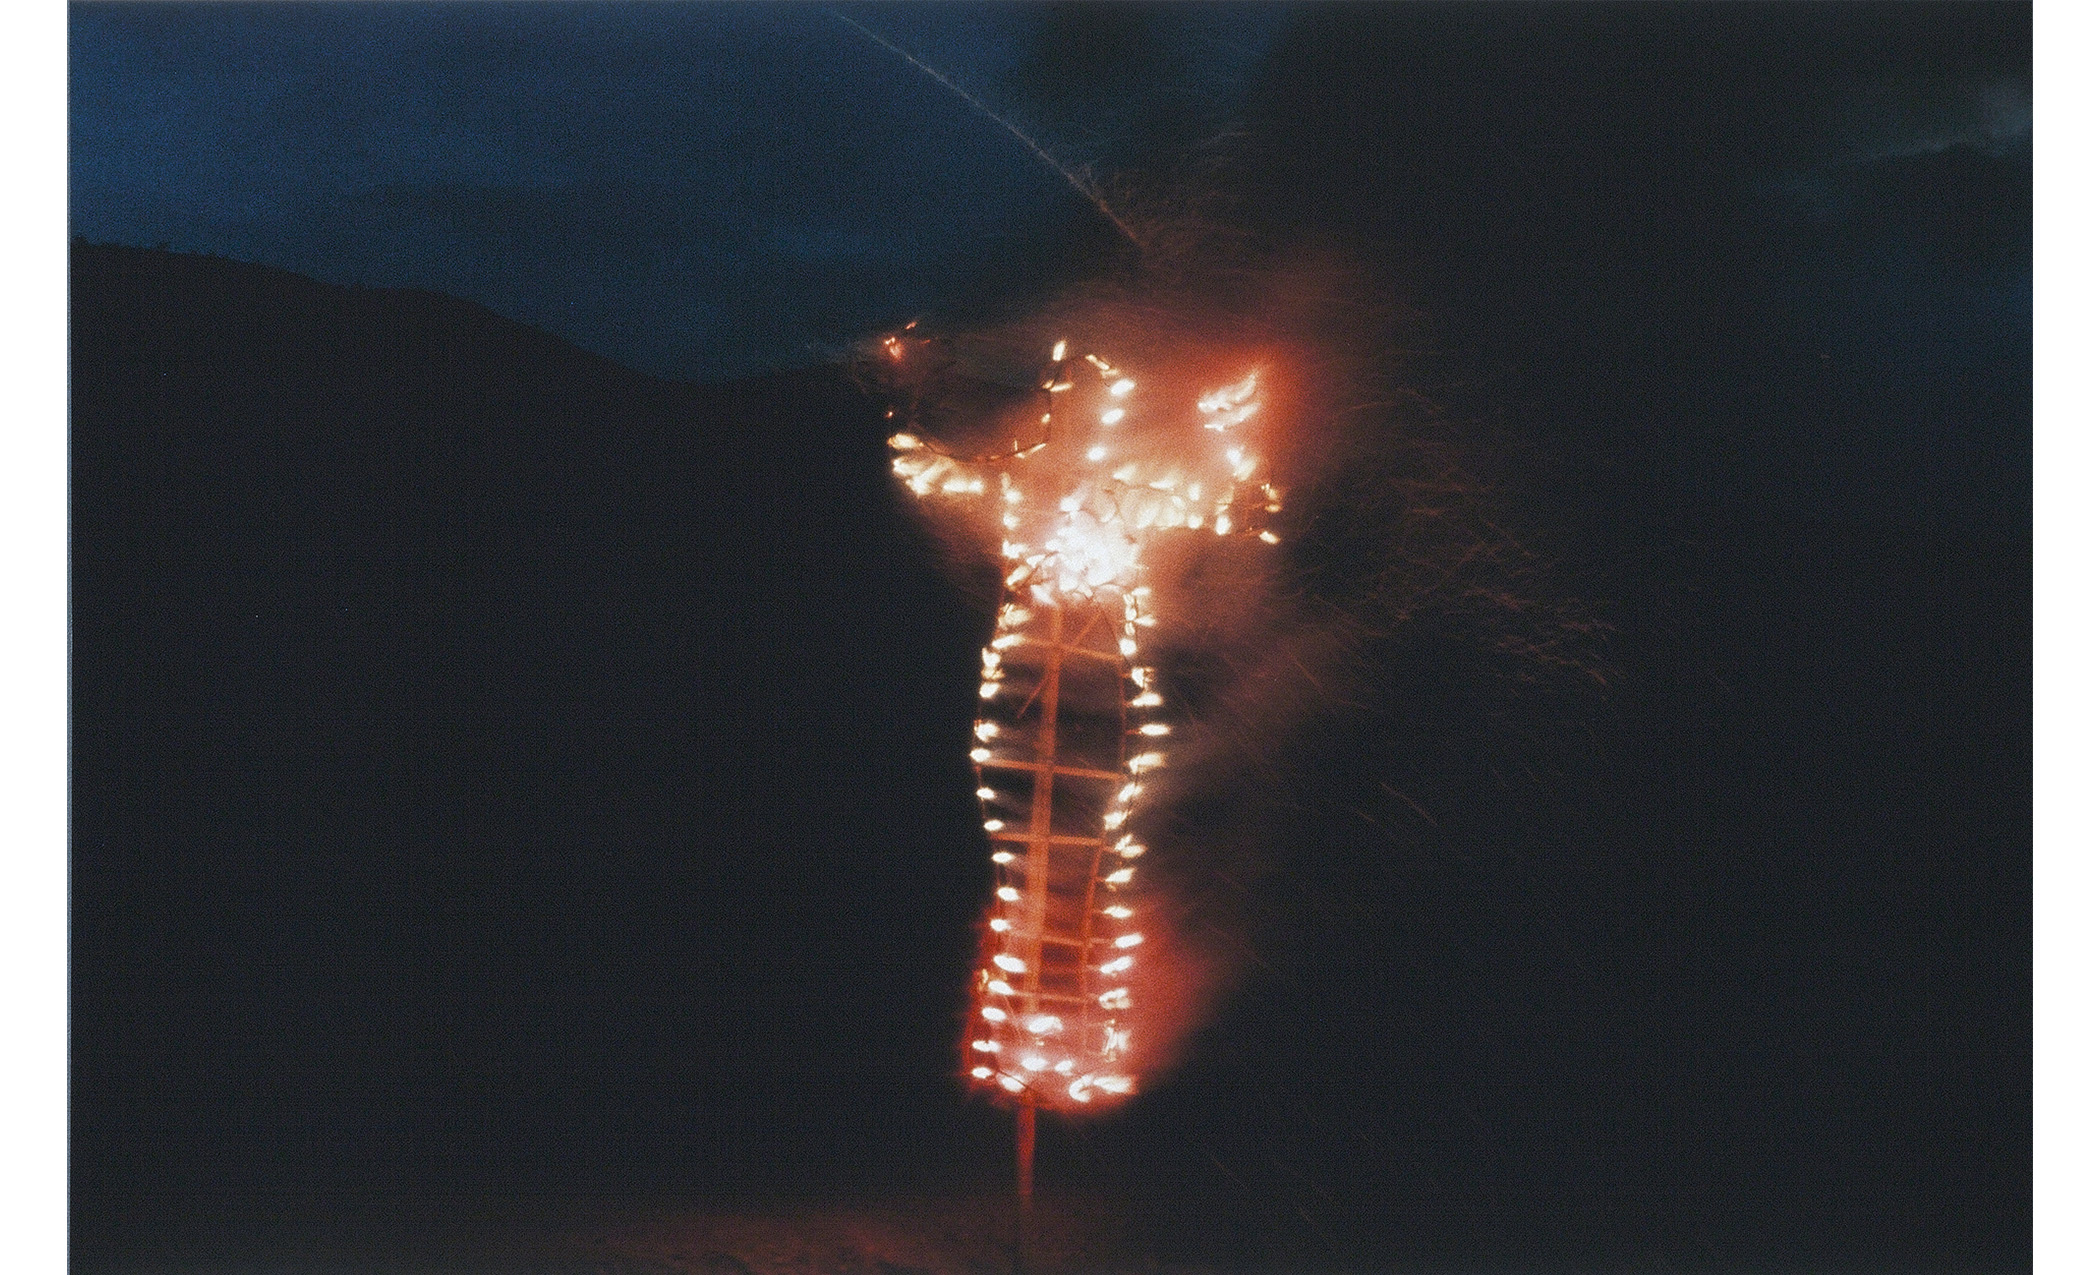 night, dark sky, low dark hills in background, burning bamboo frame in shape of woman with arms upraised on a pole in the foreground